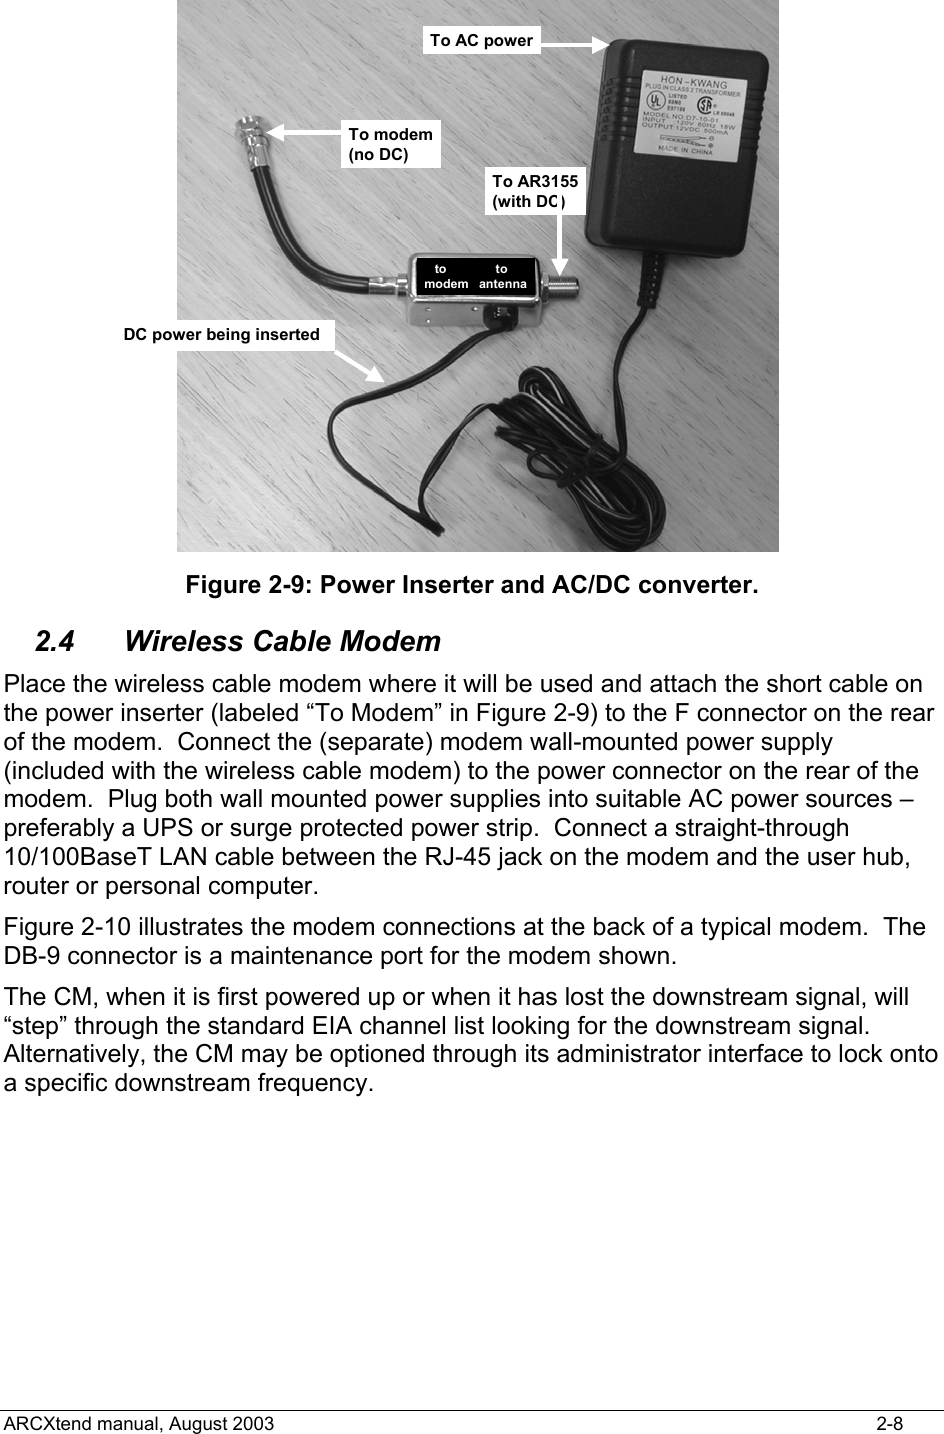  To modem(no DC)To AR3155(with DC)To AC powerDC power being insertedto              tomodem   antenna Figure 2-9: Power Inserter and AC/DC converter. 2.4 Wireless Cable Modem Place the wireless cable modem where it will be used and attach the short cable on the power inserter (labeled “To Modem” in Figure 2-9) to the F connector on the rear of the modem.  Connect the (separate) modem wall-mounted power supply (included with the wireless cable modem) to the power connector on the rear of the modem.  Plug both wall mounted power supplies into suitable AC power sources – preferably a UPS or surge protected power strip.  Connect a straight-through 10/100BaseT LAN cable between the RJ-45 jack on the modem and the user hub, router or personal computer. Figure 2-10 illustrates the modem connections at the back of a typical modem.  The DB-9 connector is a maintenance port for the modem shown.   The CM, when it is first powered up or when it has lost the downstream signal, will “step” through the standard EIA channel list looking for the downstream signal.  Alternatively, the CM may be optioned through its administrator interface to lock onto a specific downstream frequency.   ARCXtend manual, August 2003    2-8 